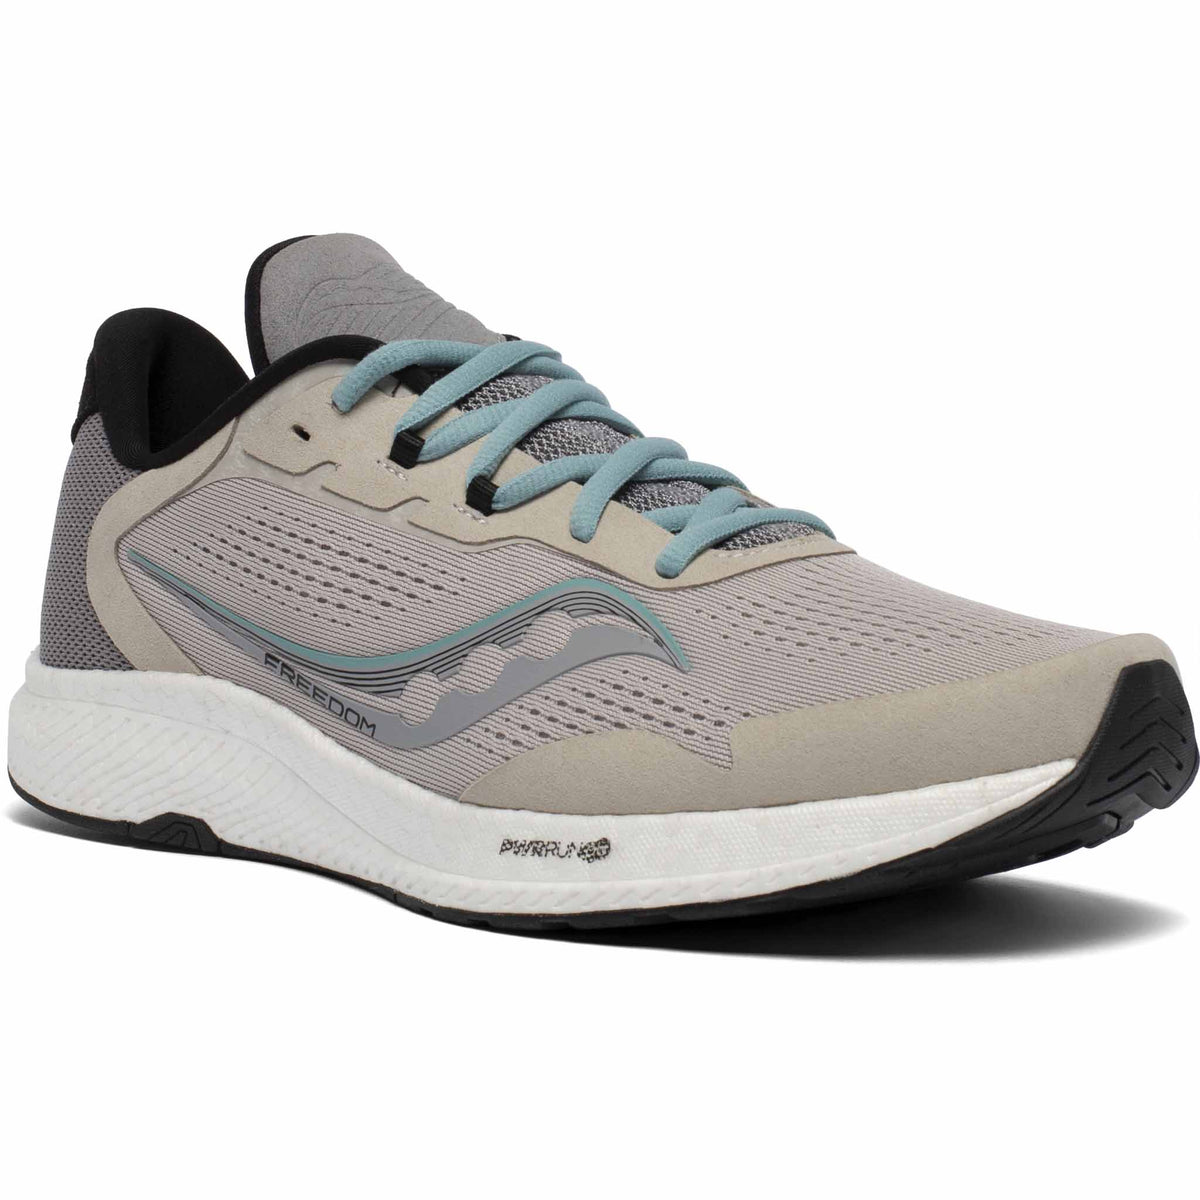 Saucony Freedom 4 chaussures de course à pied homme Stone/Alloy angle